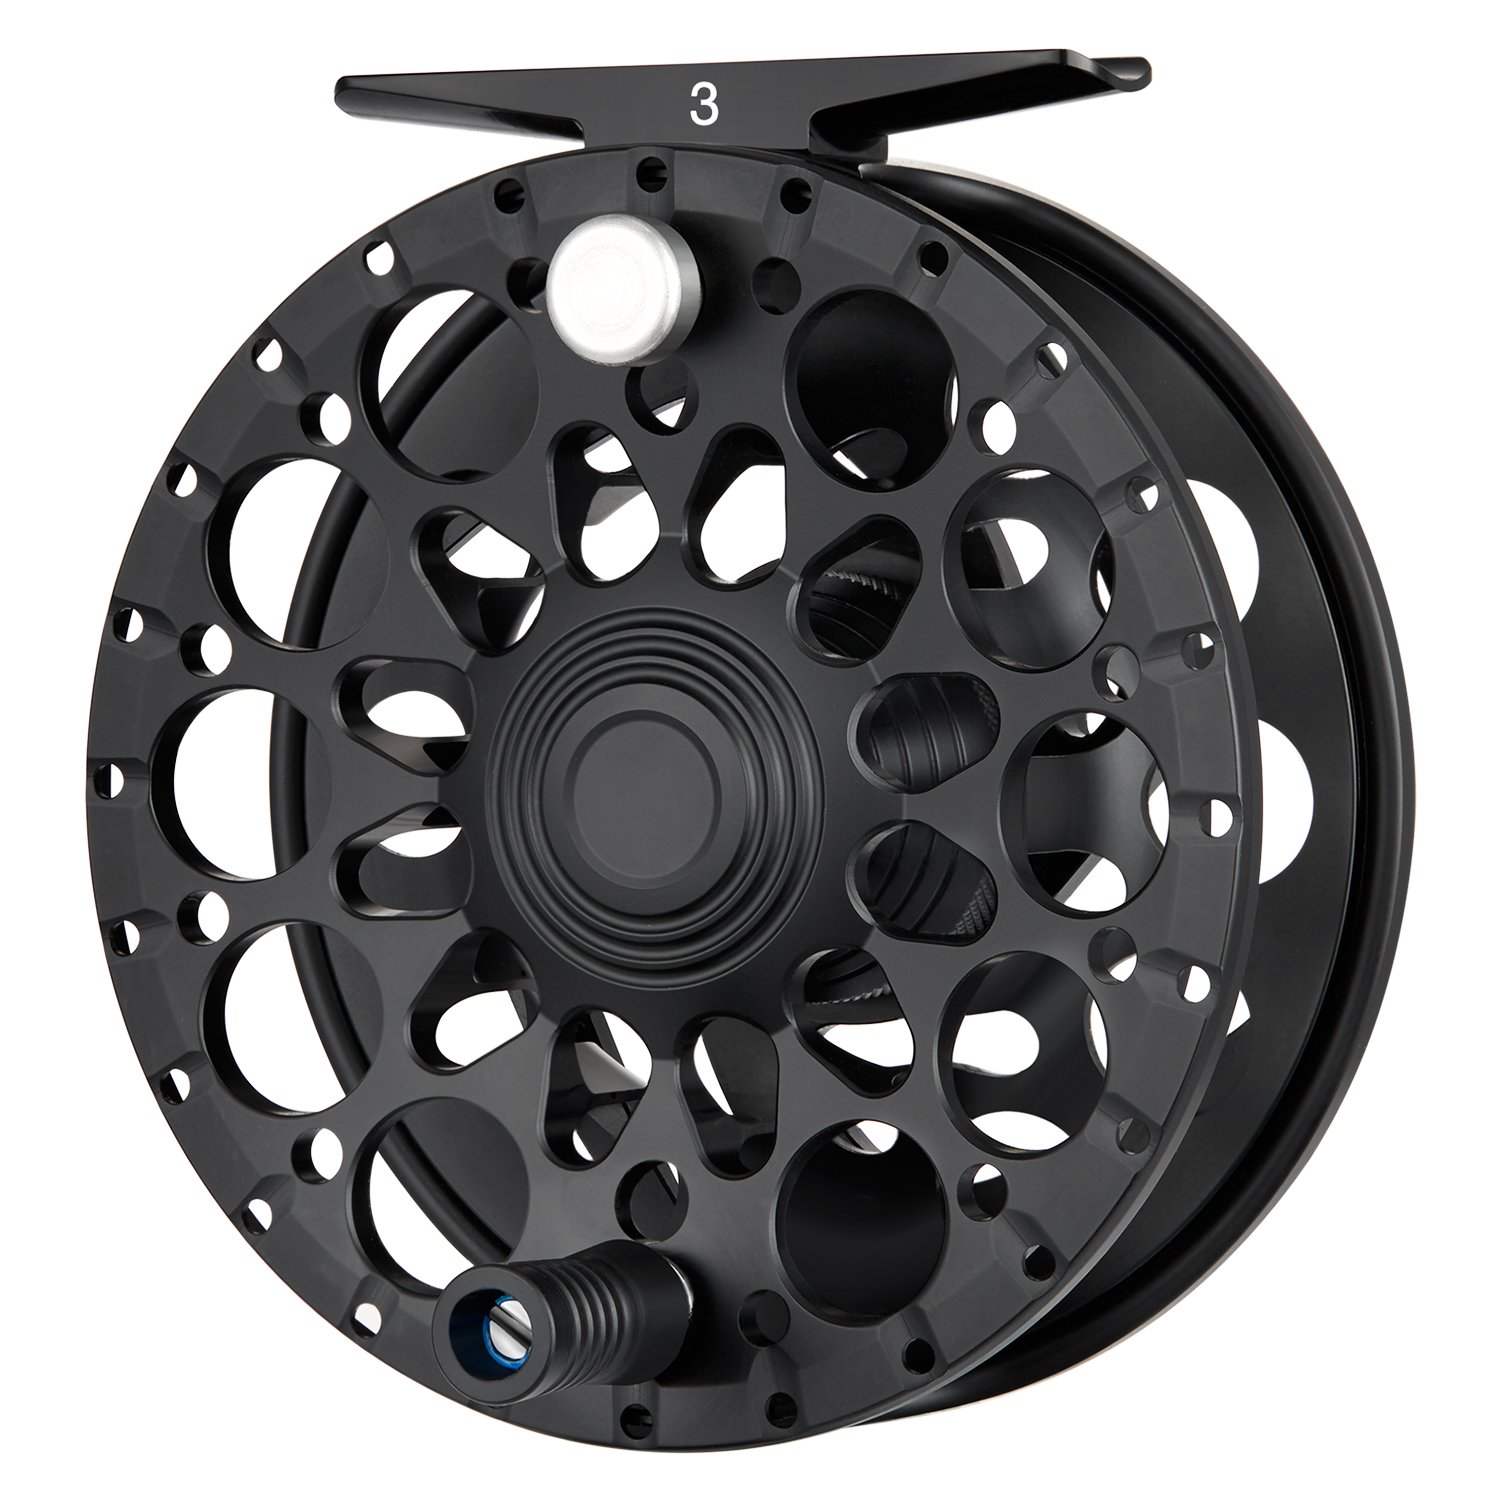 Piscifun Crest Fly Fishing Reel Large Arbor Fully Sealed Drag